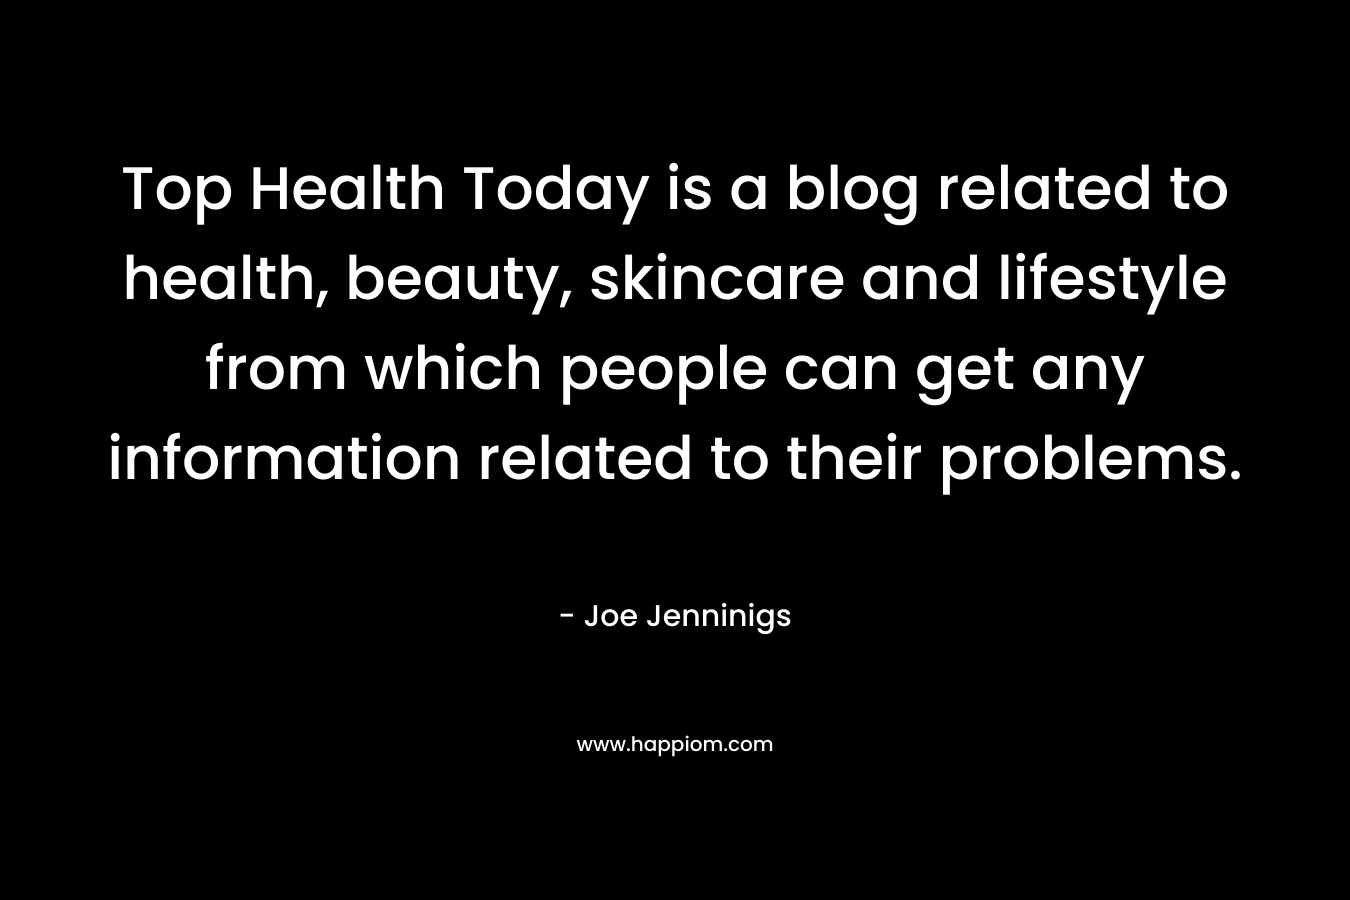 Top Health Today is a blog related to health, beauty, skincare and lifestyle from which people can get any information related to their problems.